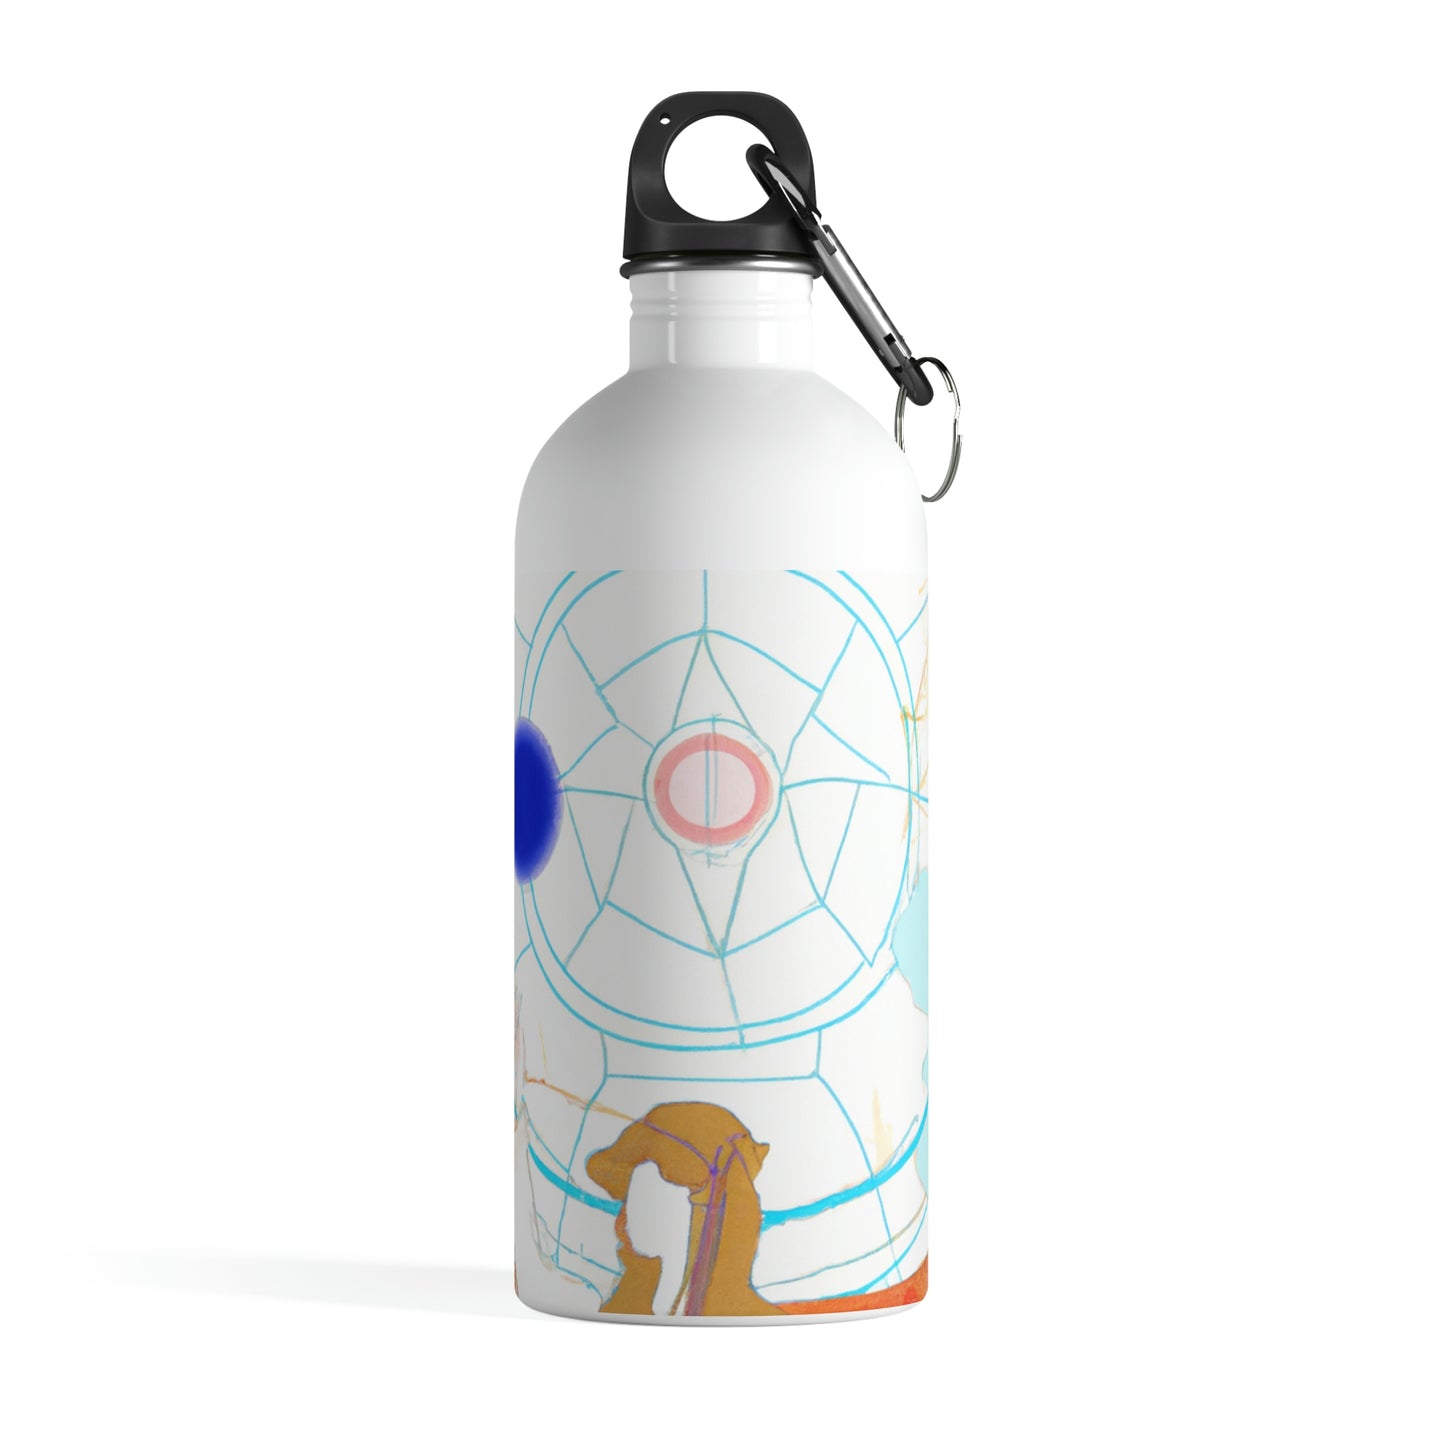 their school

The Secret Realm of High School - The Alien Stainless Steel Water Bottle